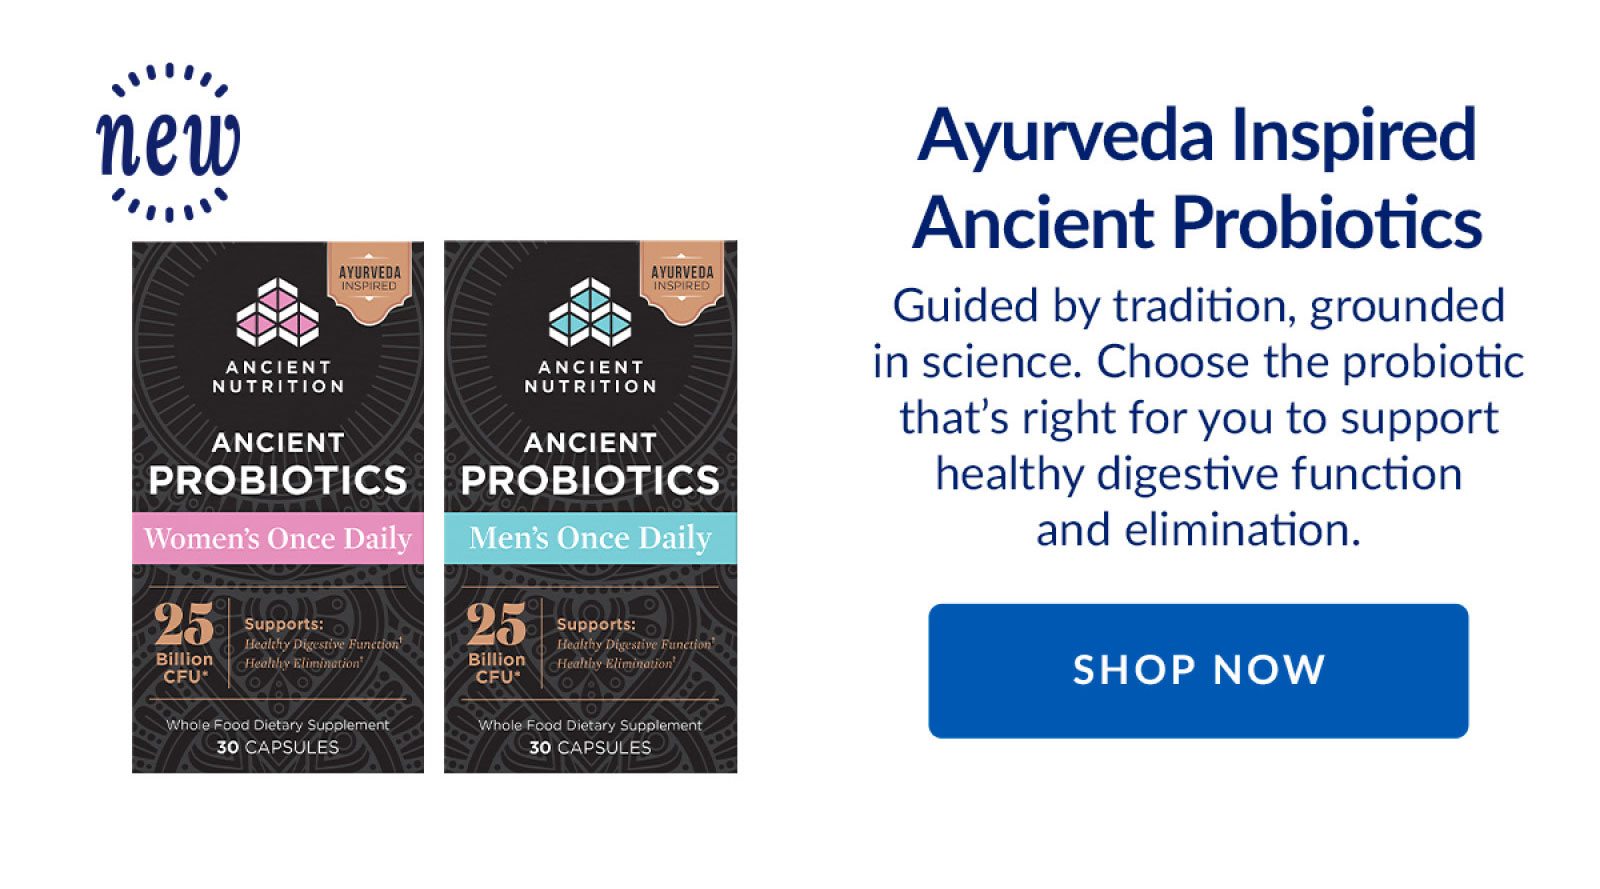 Ayurveda Inspired Ancient Probiotics | Guided by tradition, grounded in science. Choose the probiotic that's right for you to support healthy digestive function and elimination | SHOP NOW